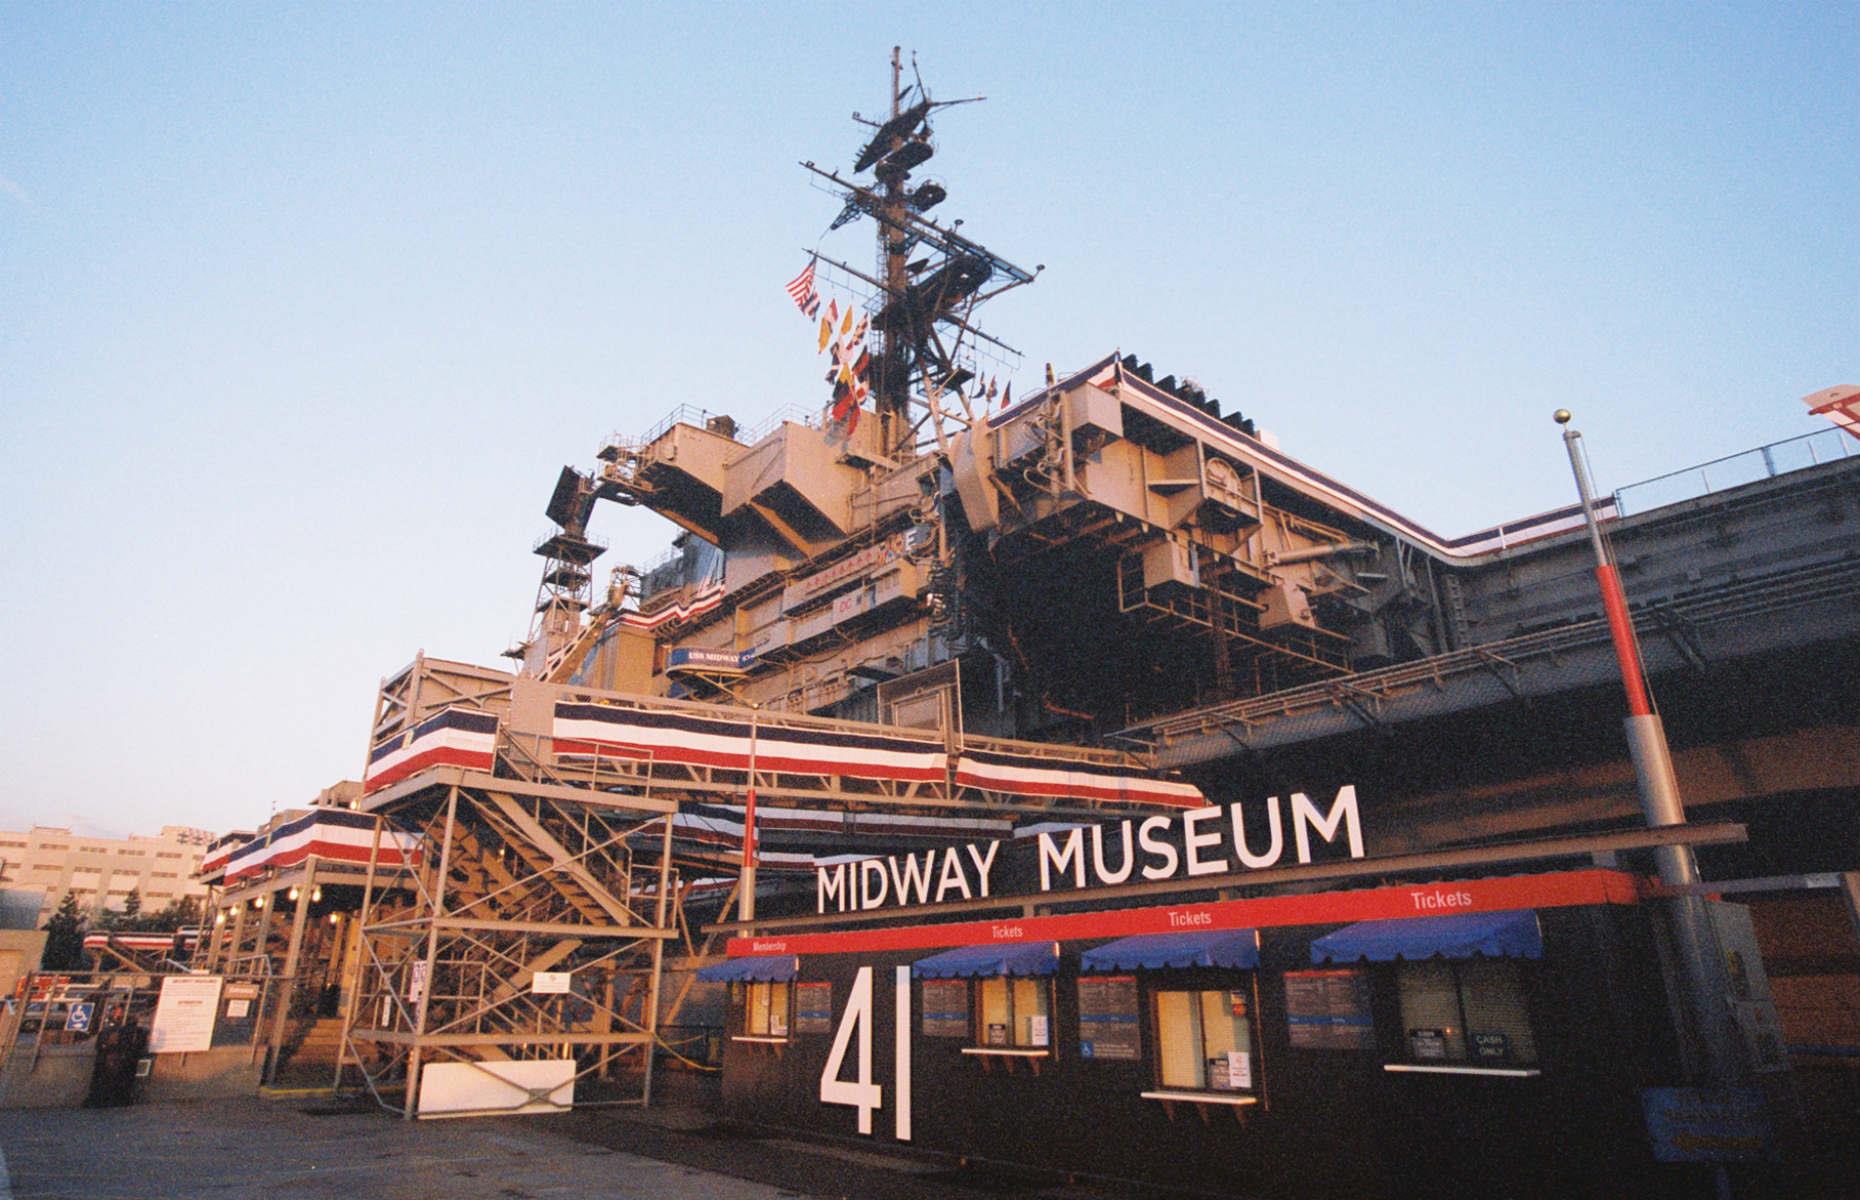 <p>Now <a href="https://www.midway.org/">a museum ship</a> in downtown San Diego, you can explore more than 60 exhibits in the hangar and on the flight and lower decks. See over 30 restored aircraft, and try out the flight simulators or join guided tours.</p>  <p><strong><a href="http://www.loveexploring.com/guides/74496/explore-san-diego-where-to-stay-what-to-eat-the-top-things-to-do">The top things to do in San Diego</a></strong></p>